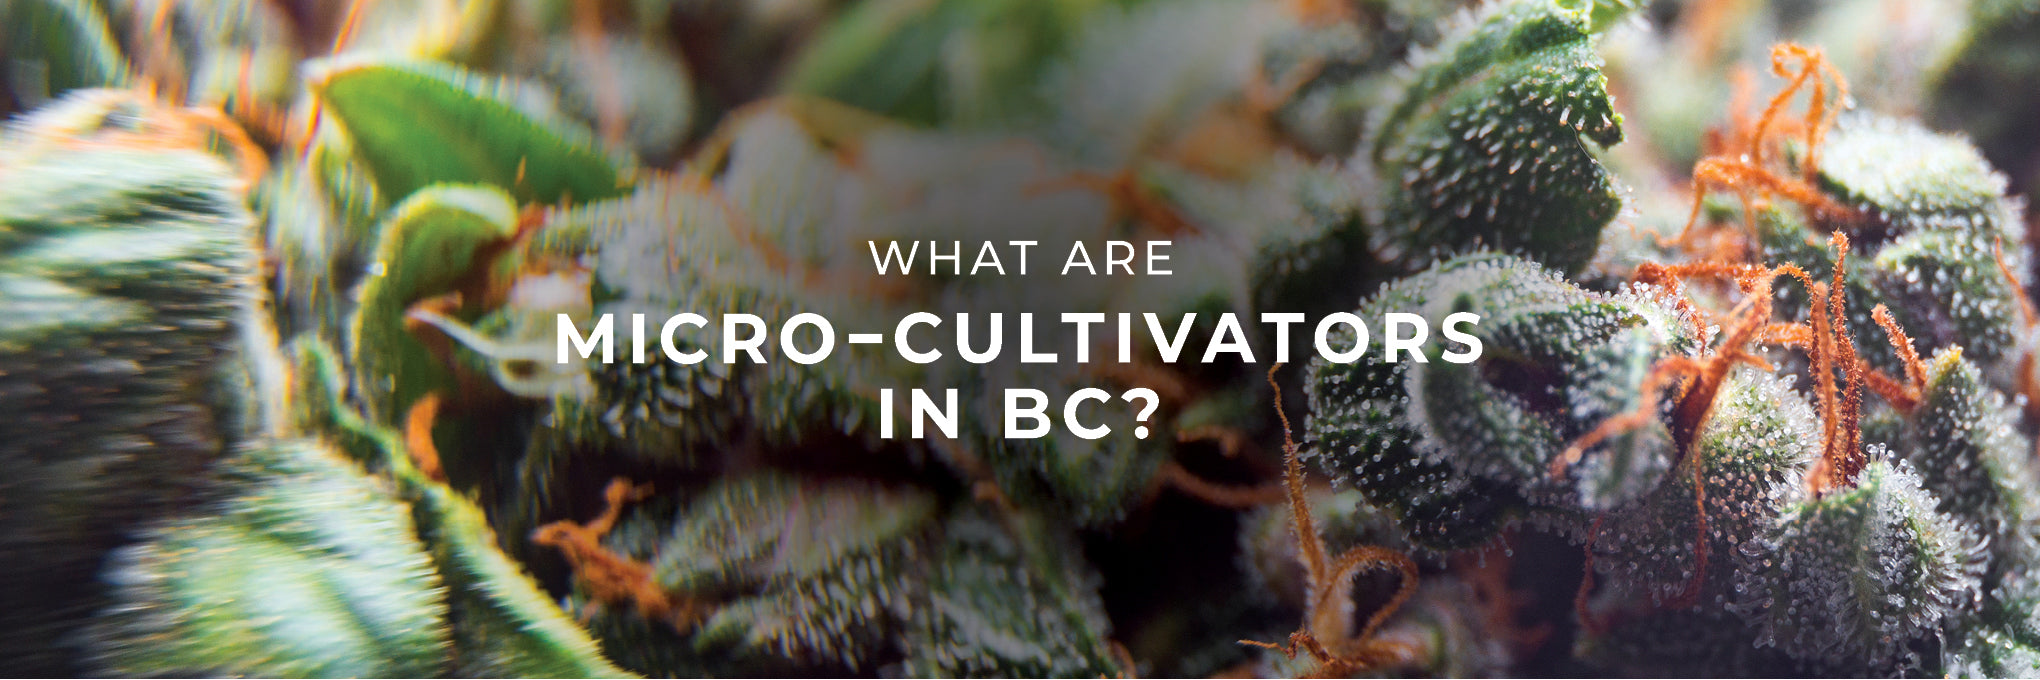 What are Micro-Cultivators in BC?